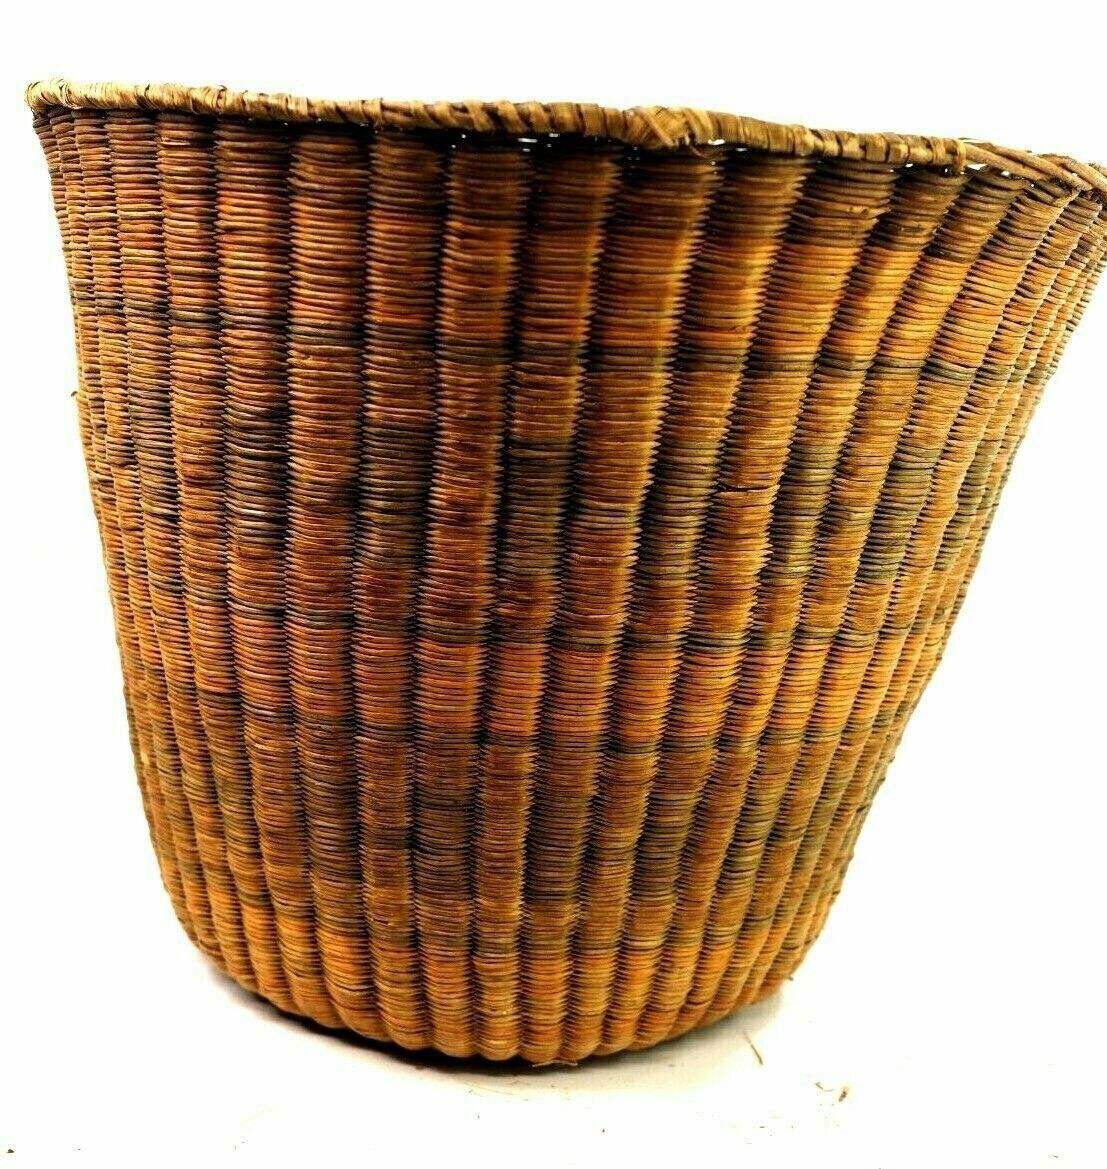 Scarce Large Antique Hopi Cylindrical Woven Wicker Basket 15